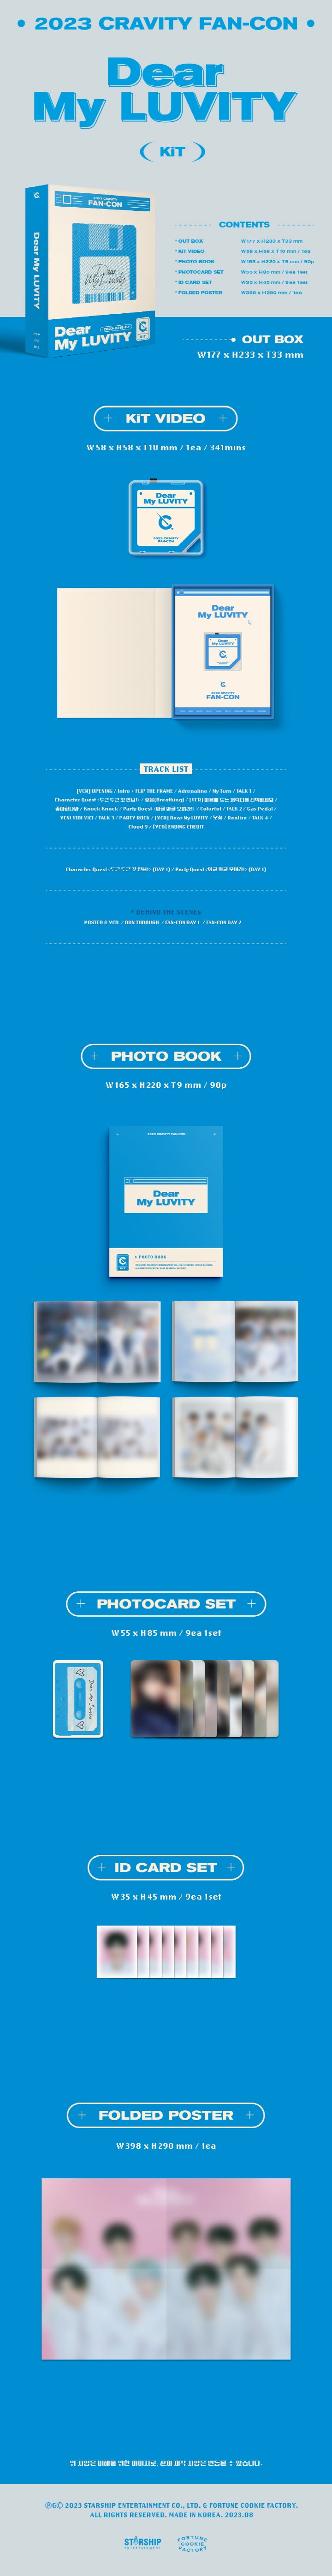 1 KiT Video
1 Photo Book (90 pages)
9 Photo Cards
9 ID Cards
1 Folded Poster